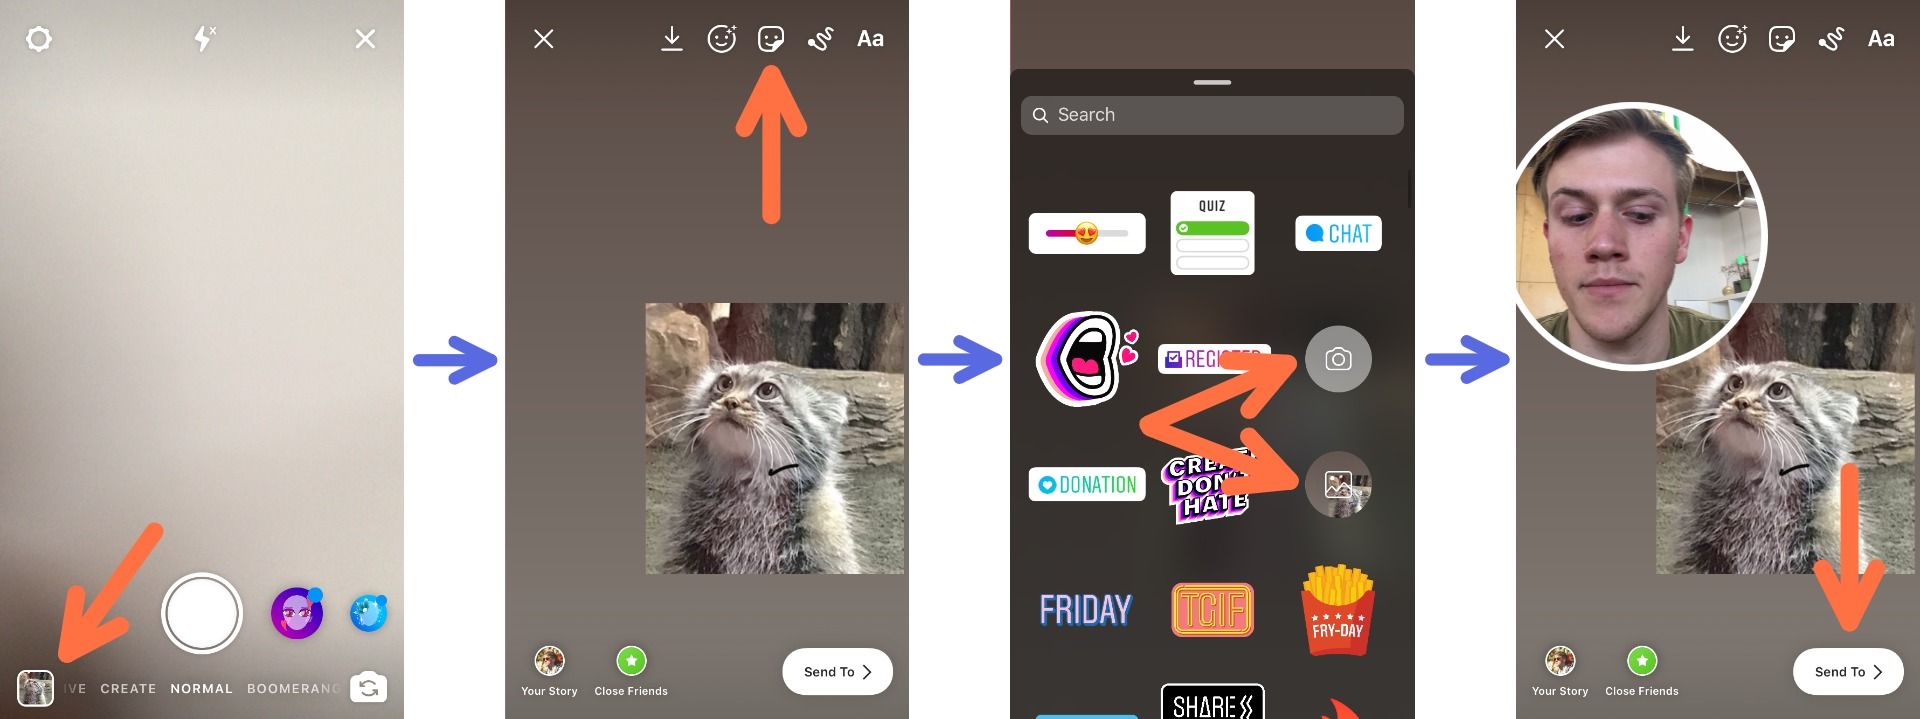 Screenshots showing how to add several images to an IG Story in the Instagram app.